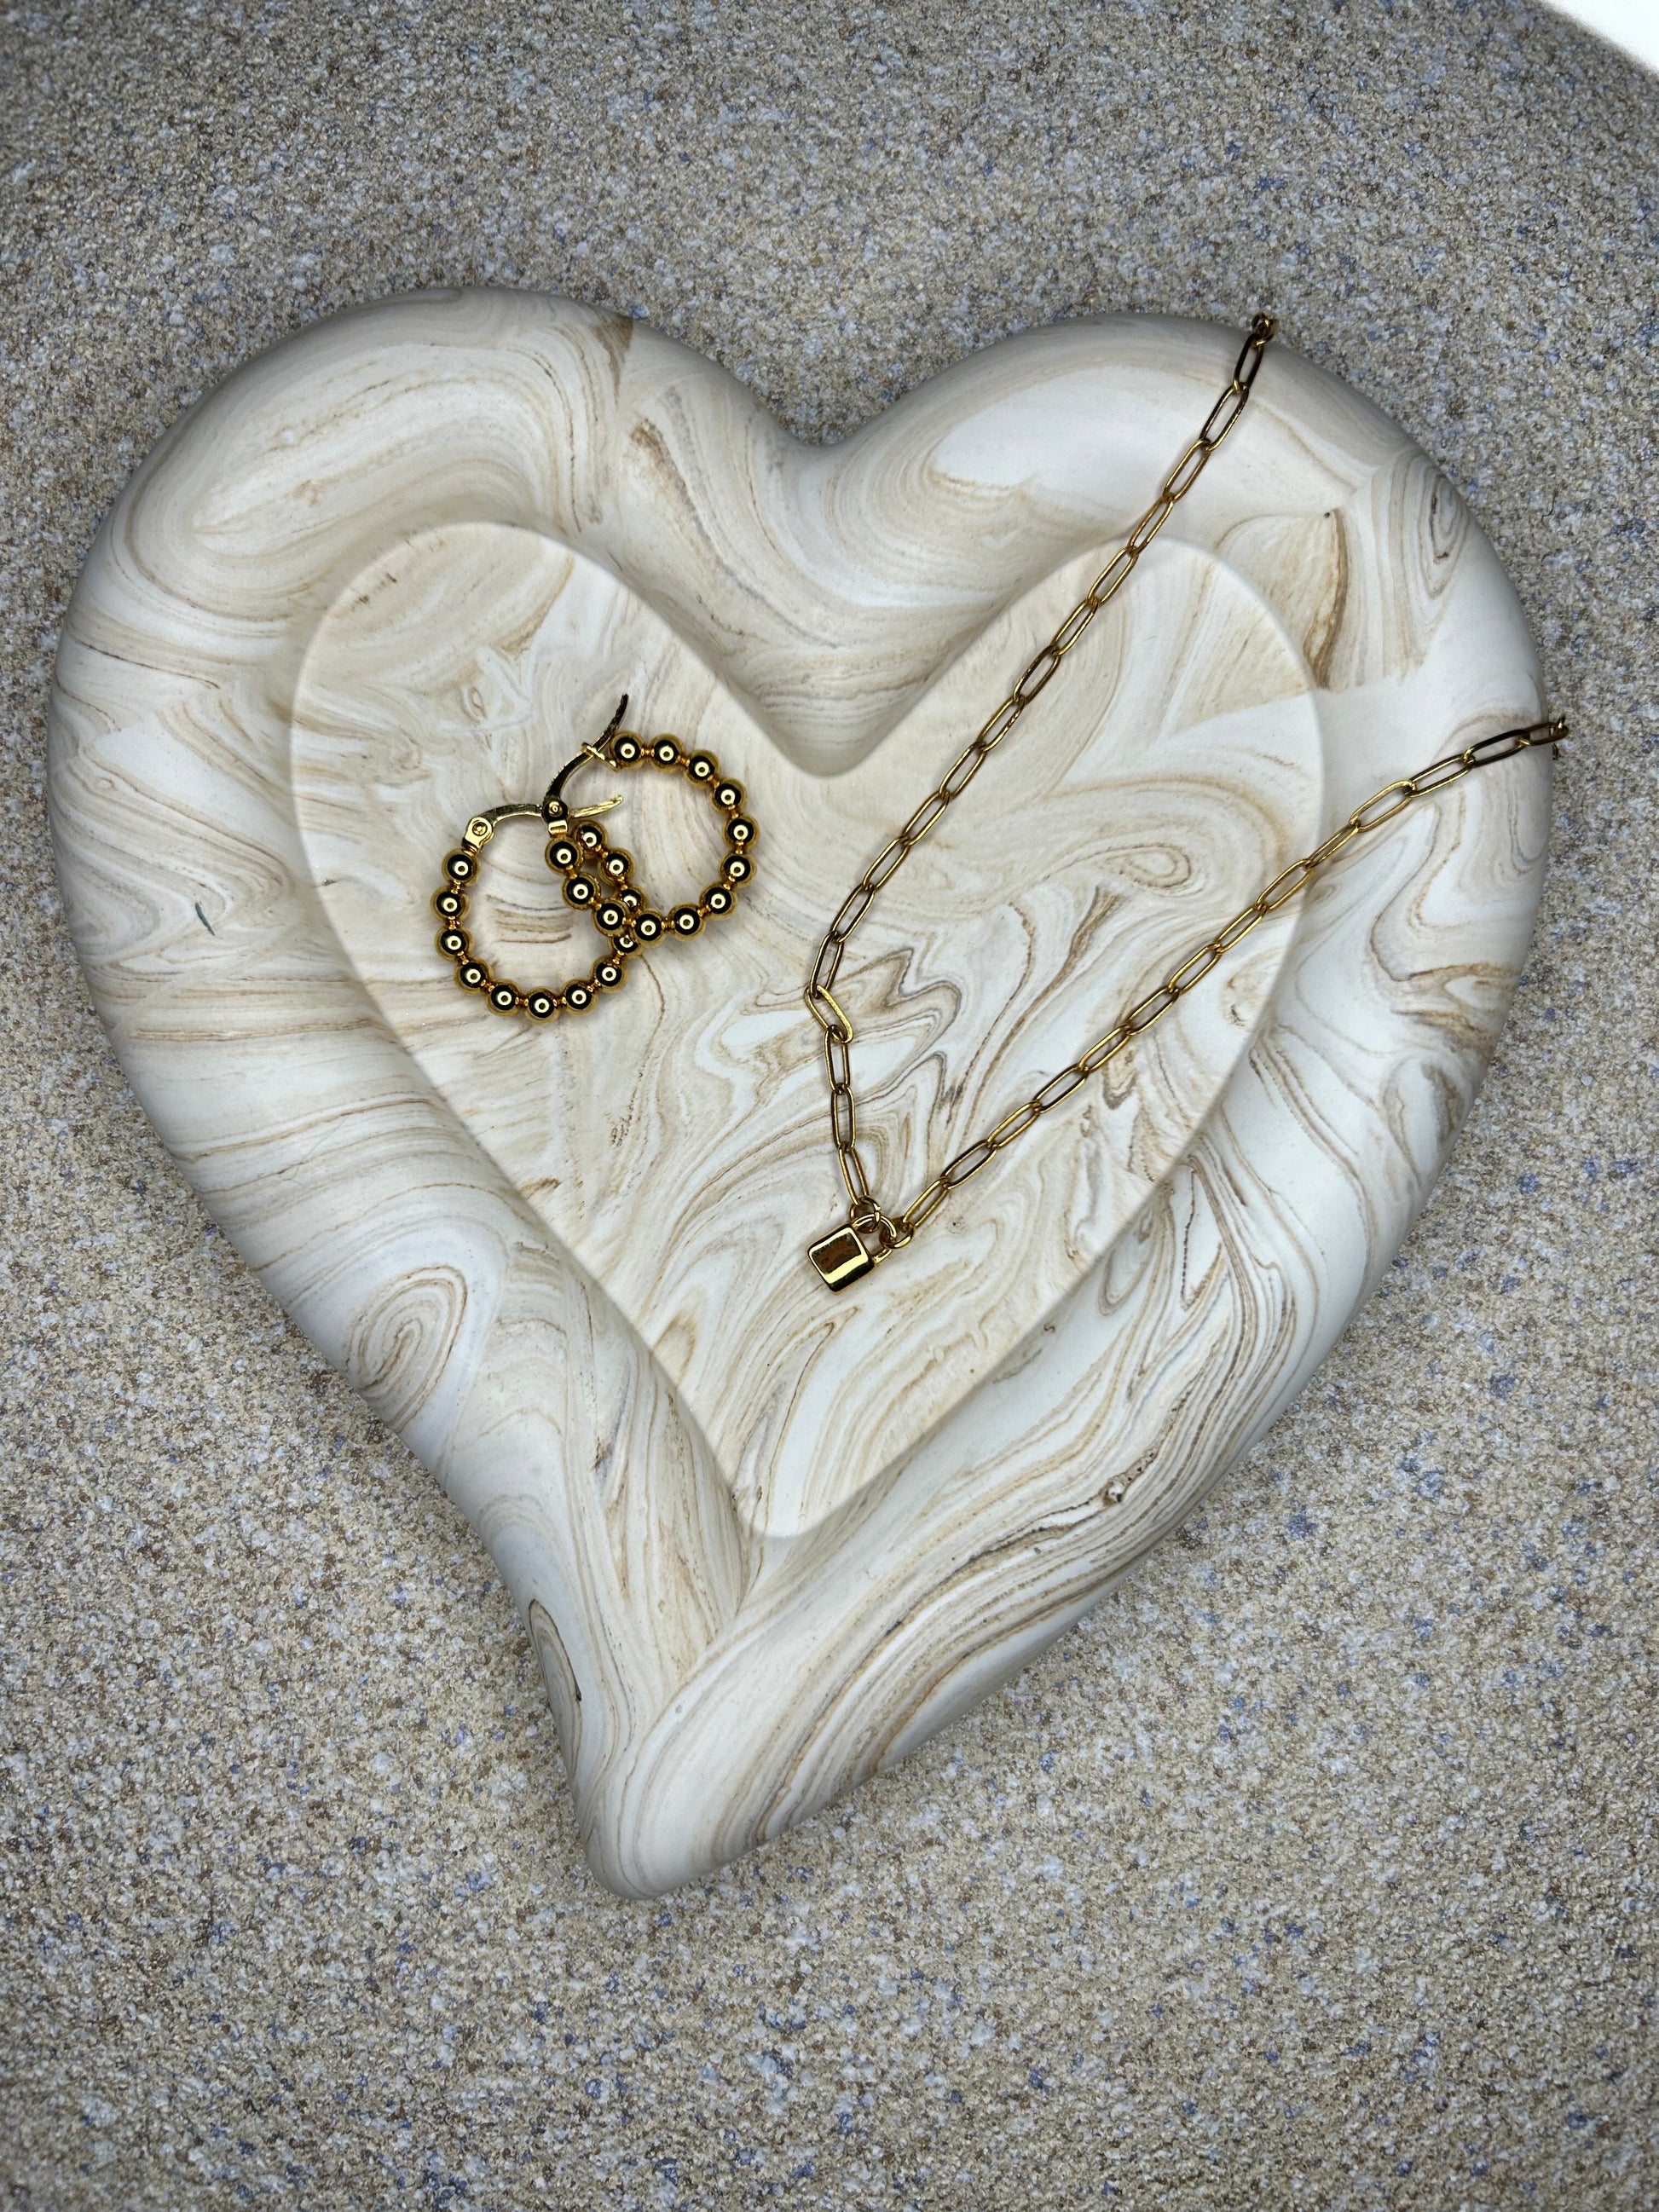 Handmade Home Accessories - A brown marble chunky heart trinket tray, on a natural stone background with a pair of gold hoop earrings and a padlock necklace displayed on it.